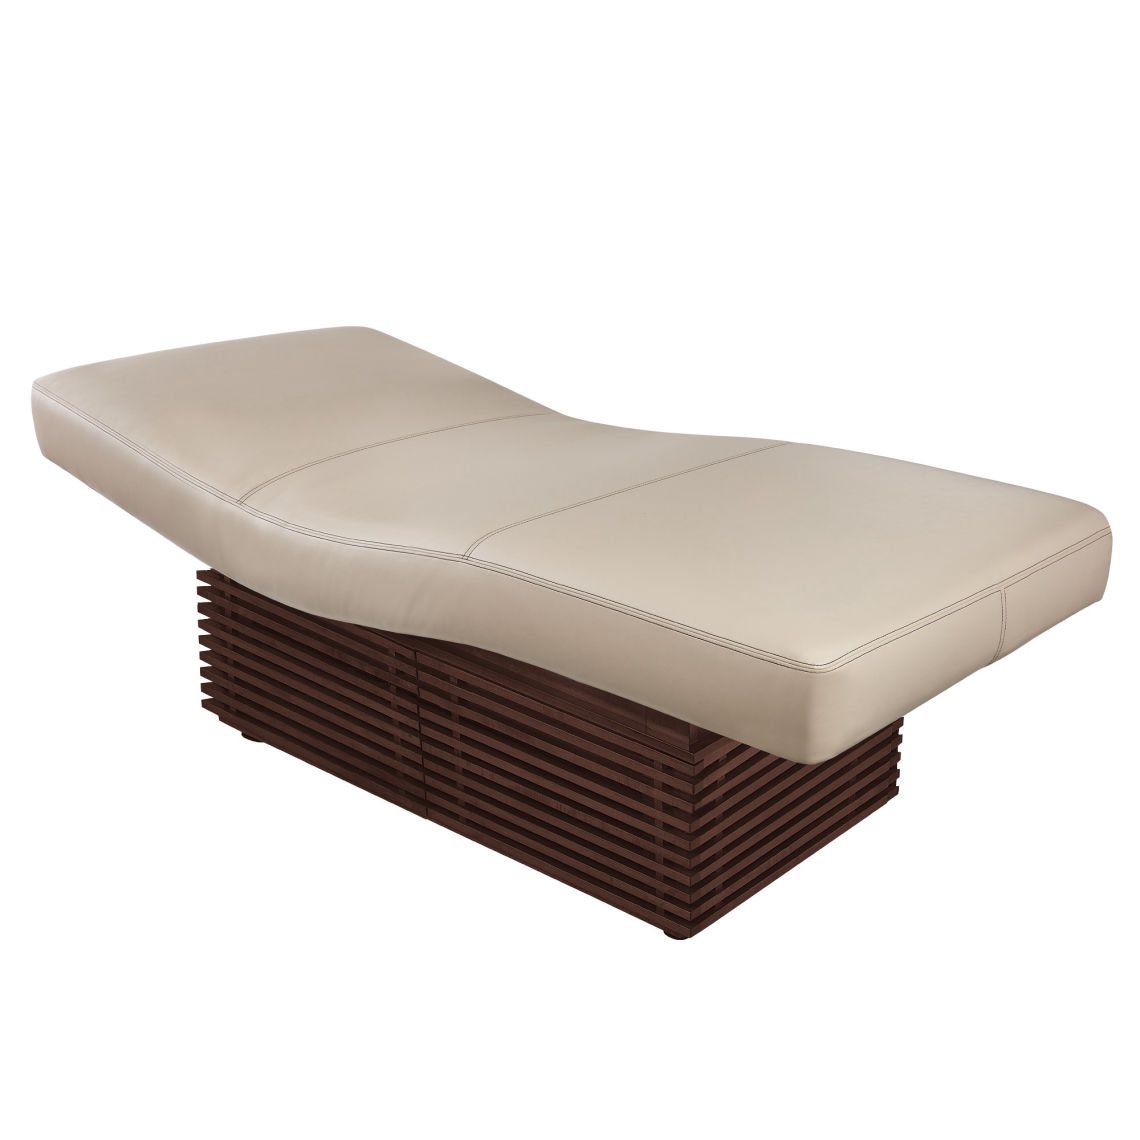 Insignia Modern™ Multi-purpose treatment table with replaceable mattress